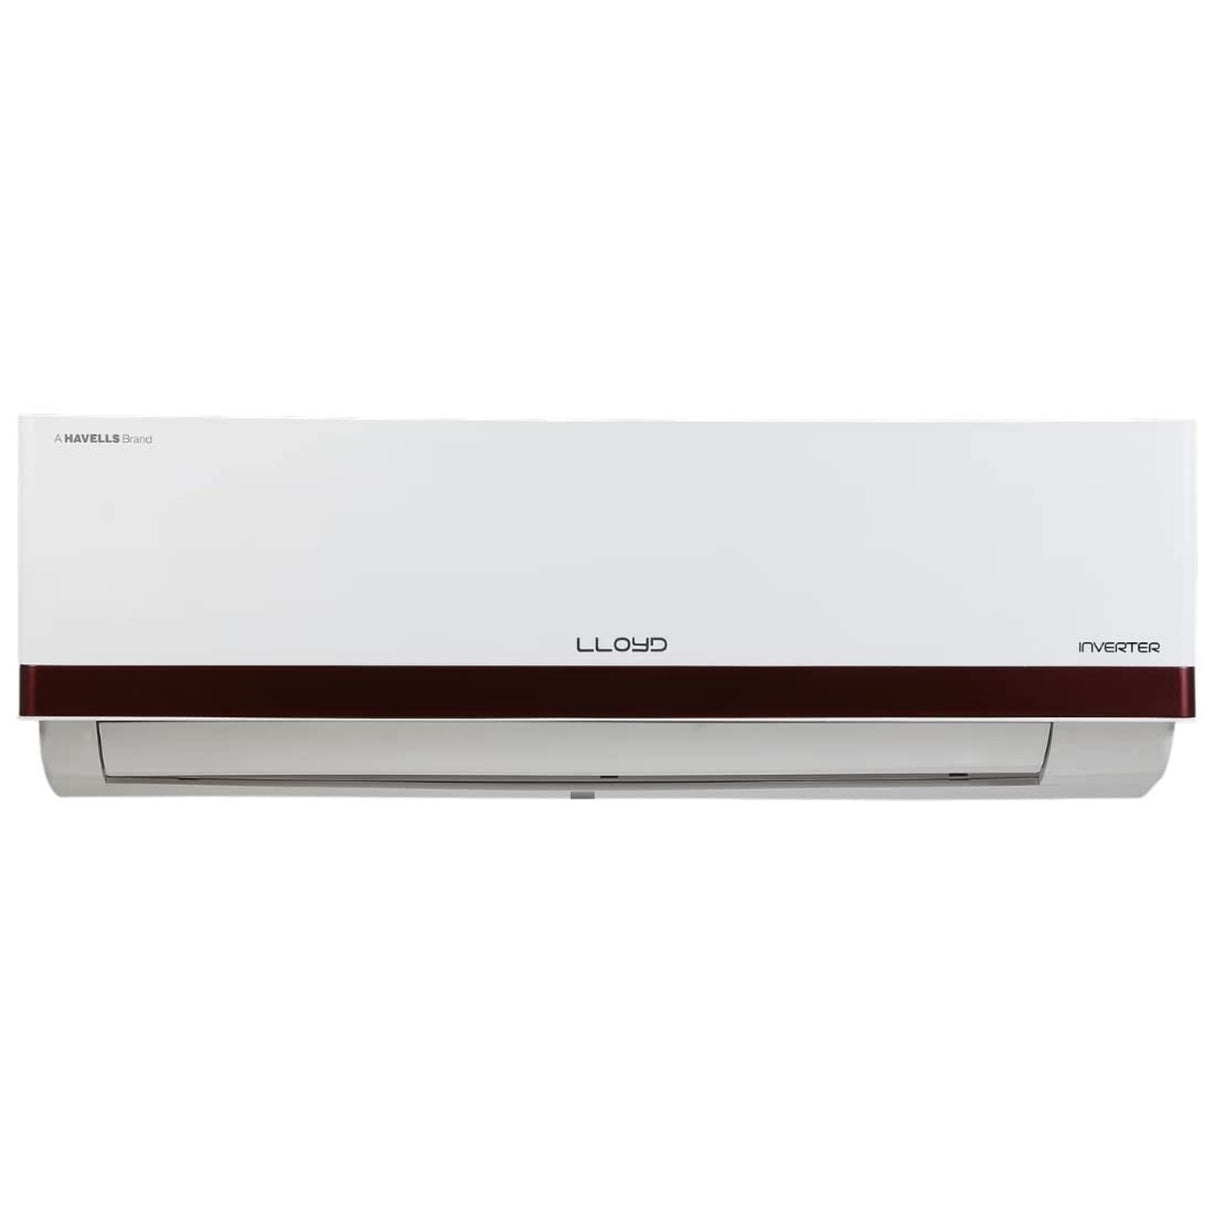 Lloyd 1.5 Ton 5 Star Inverter 5 In 1 Convertible Split AC with Strong Dehumidifier (GLS18I5FWRBW, White)